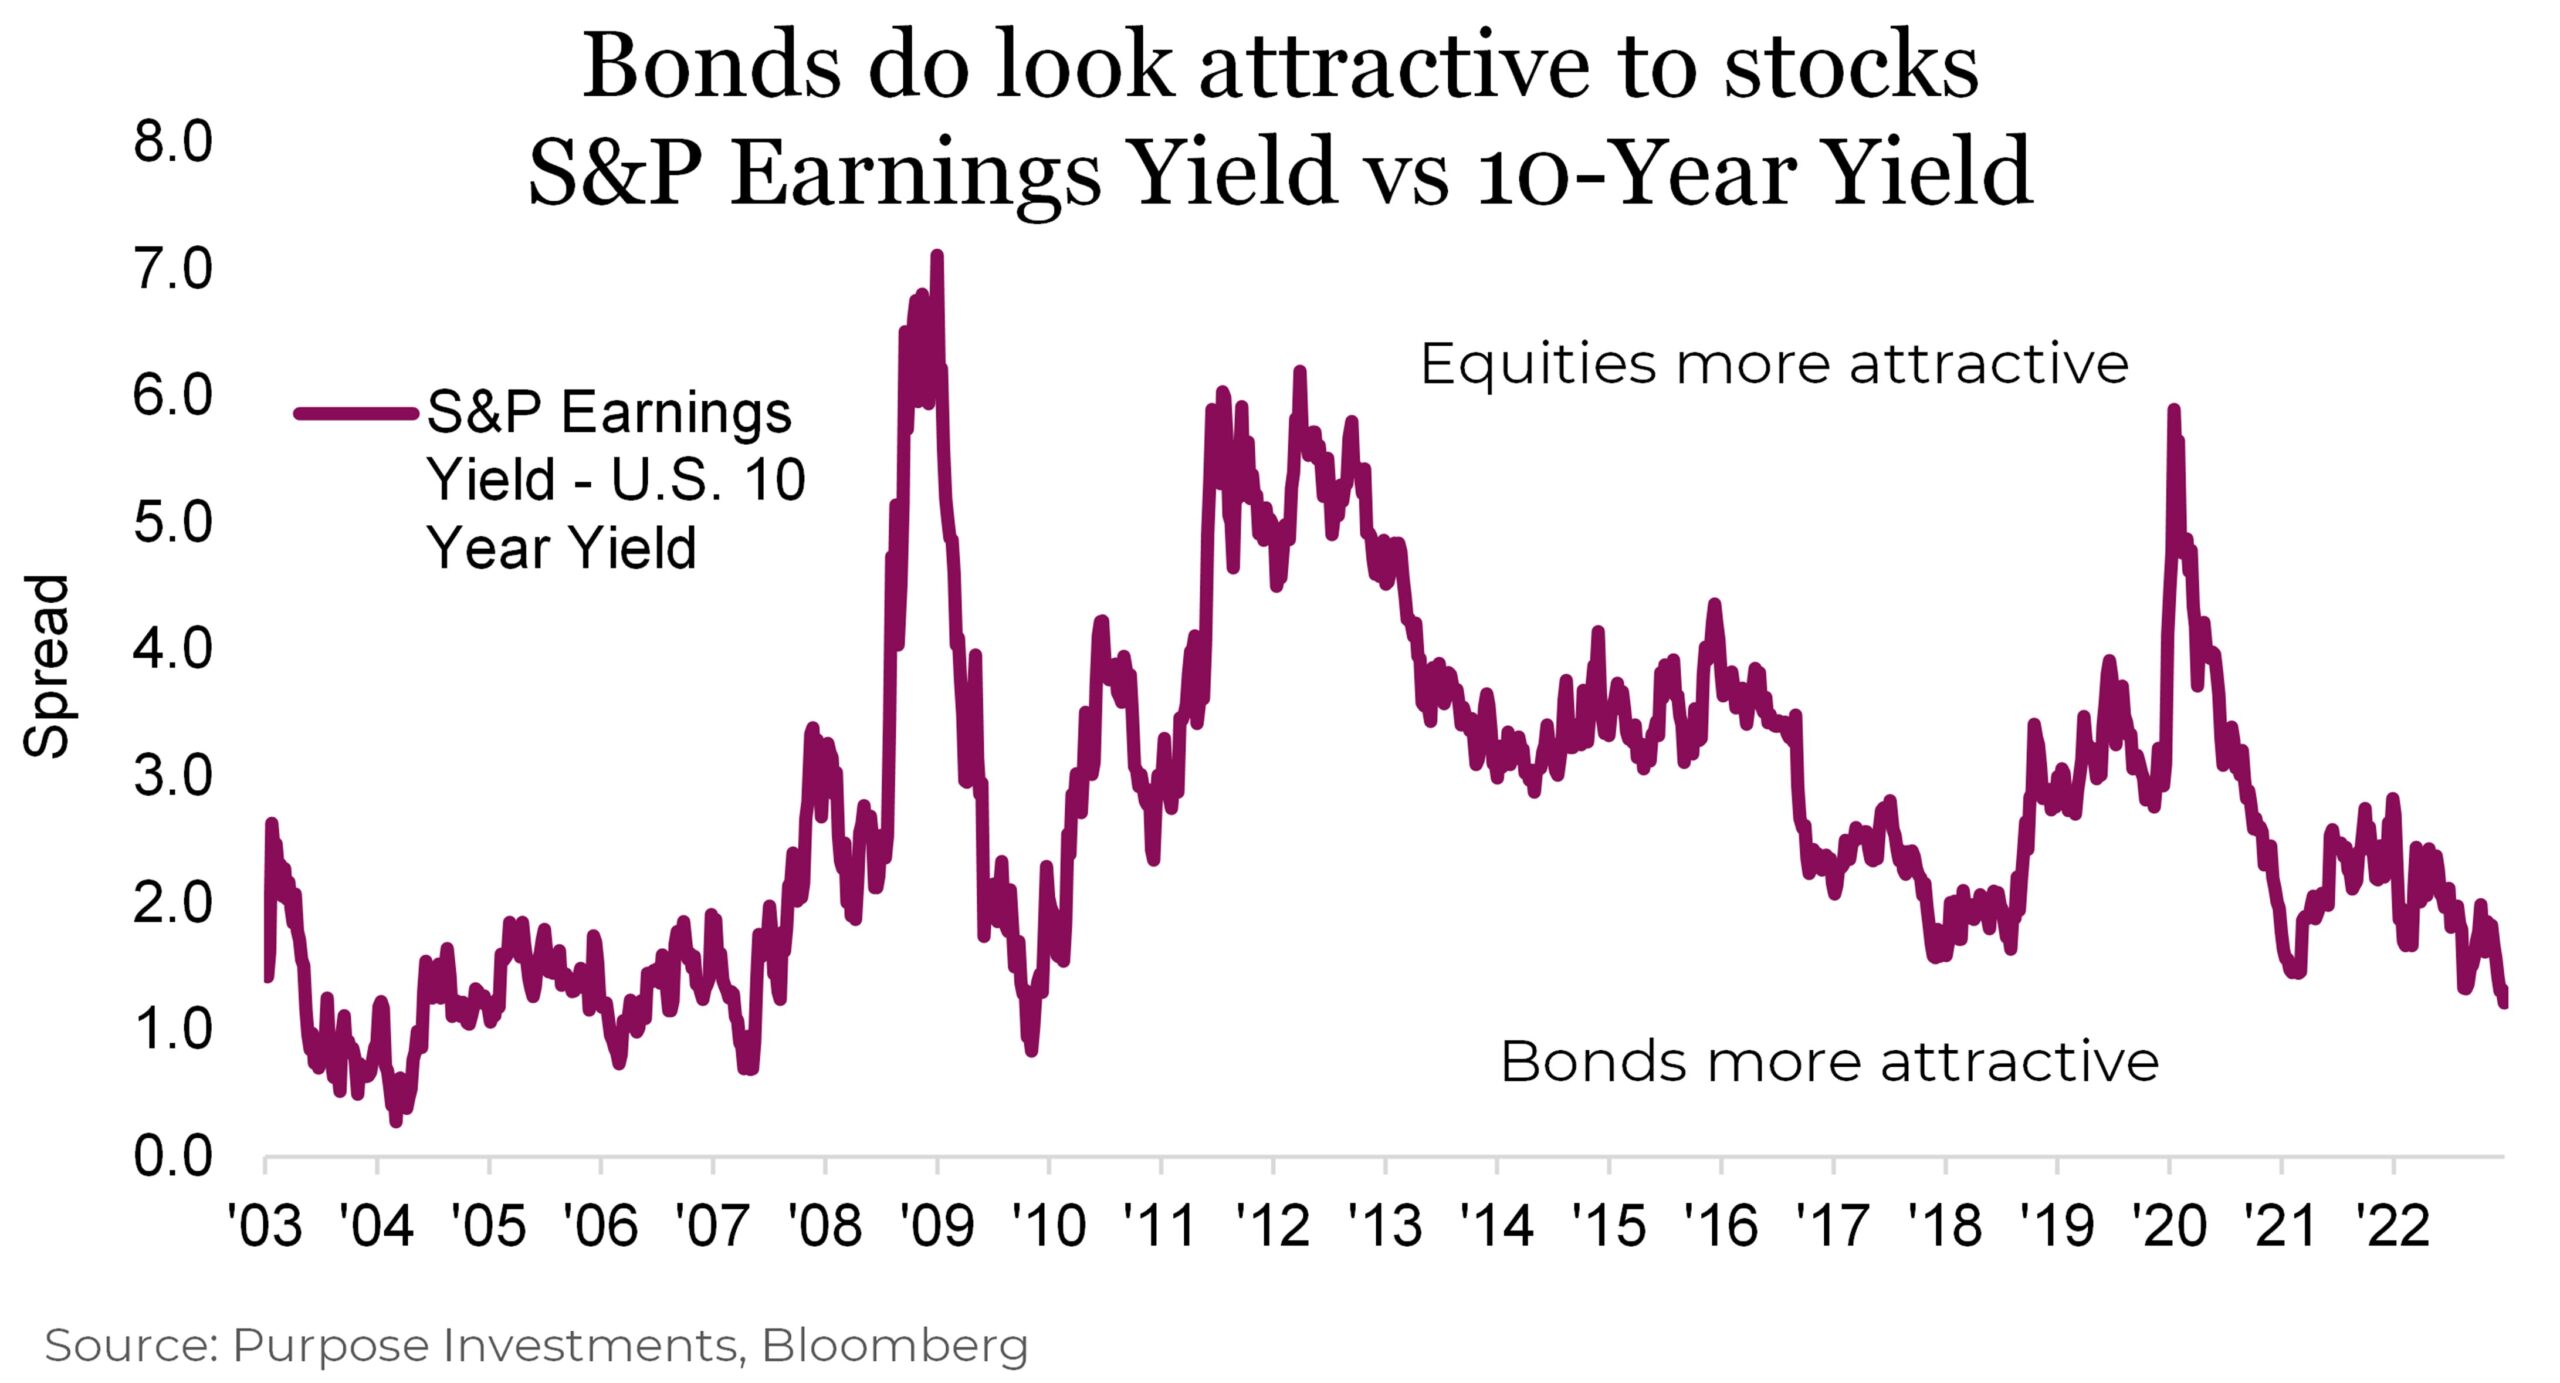 Bonds do look attractive to stocks
S&P Earnings Yield vs 10-Year Yield